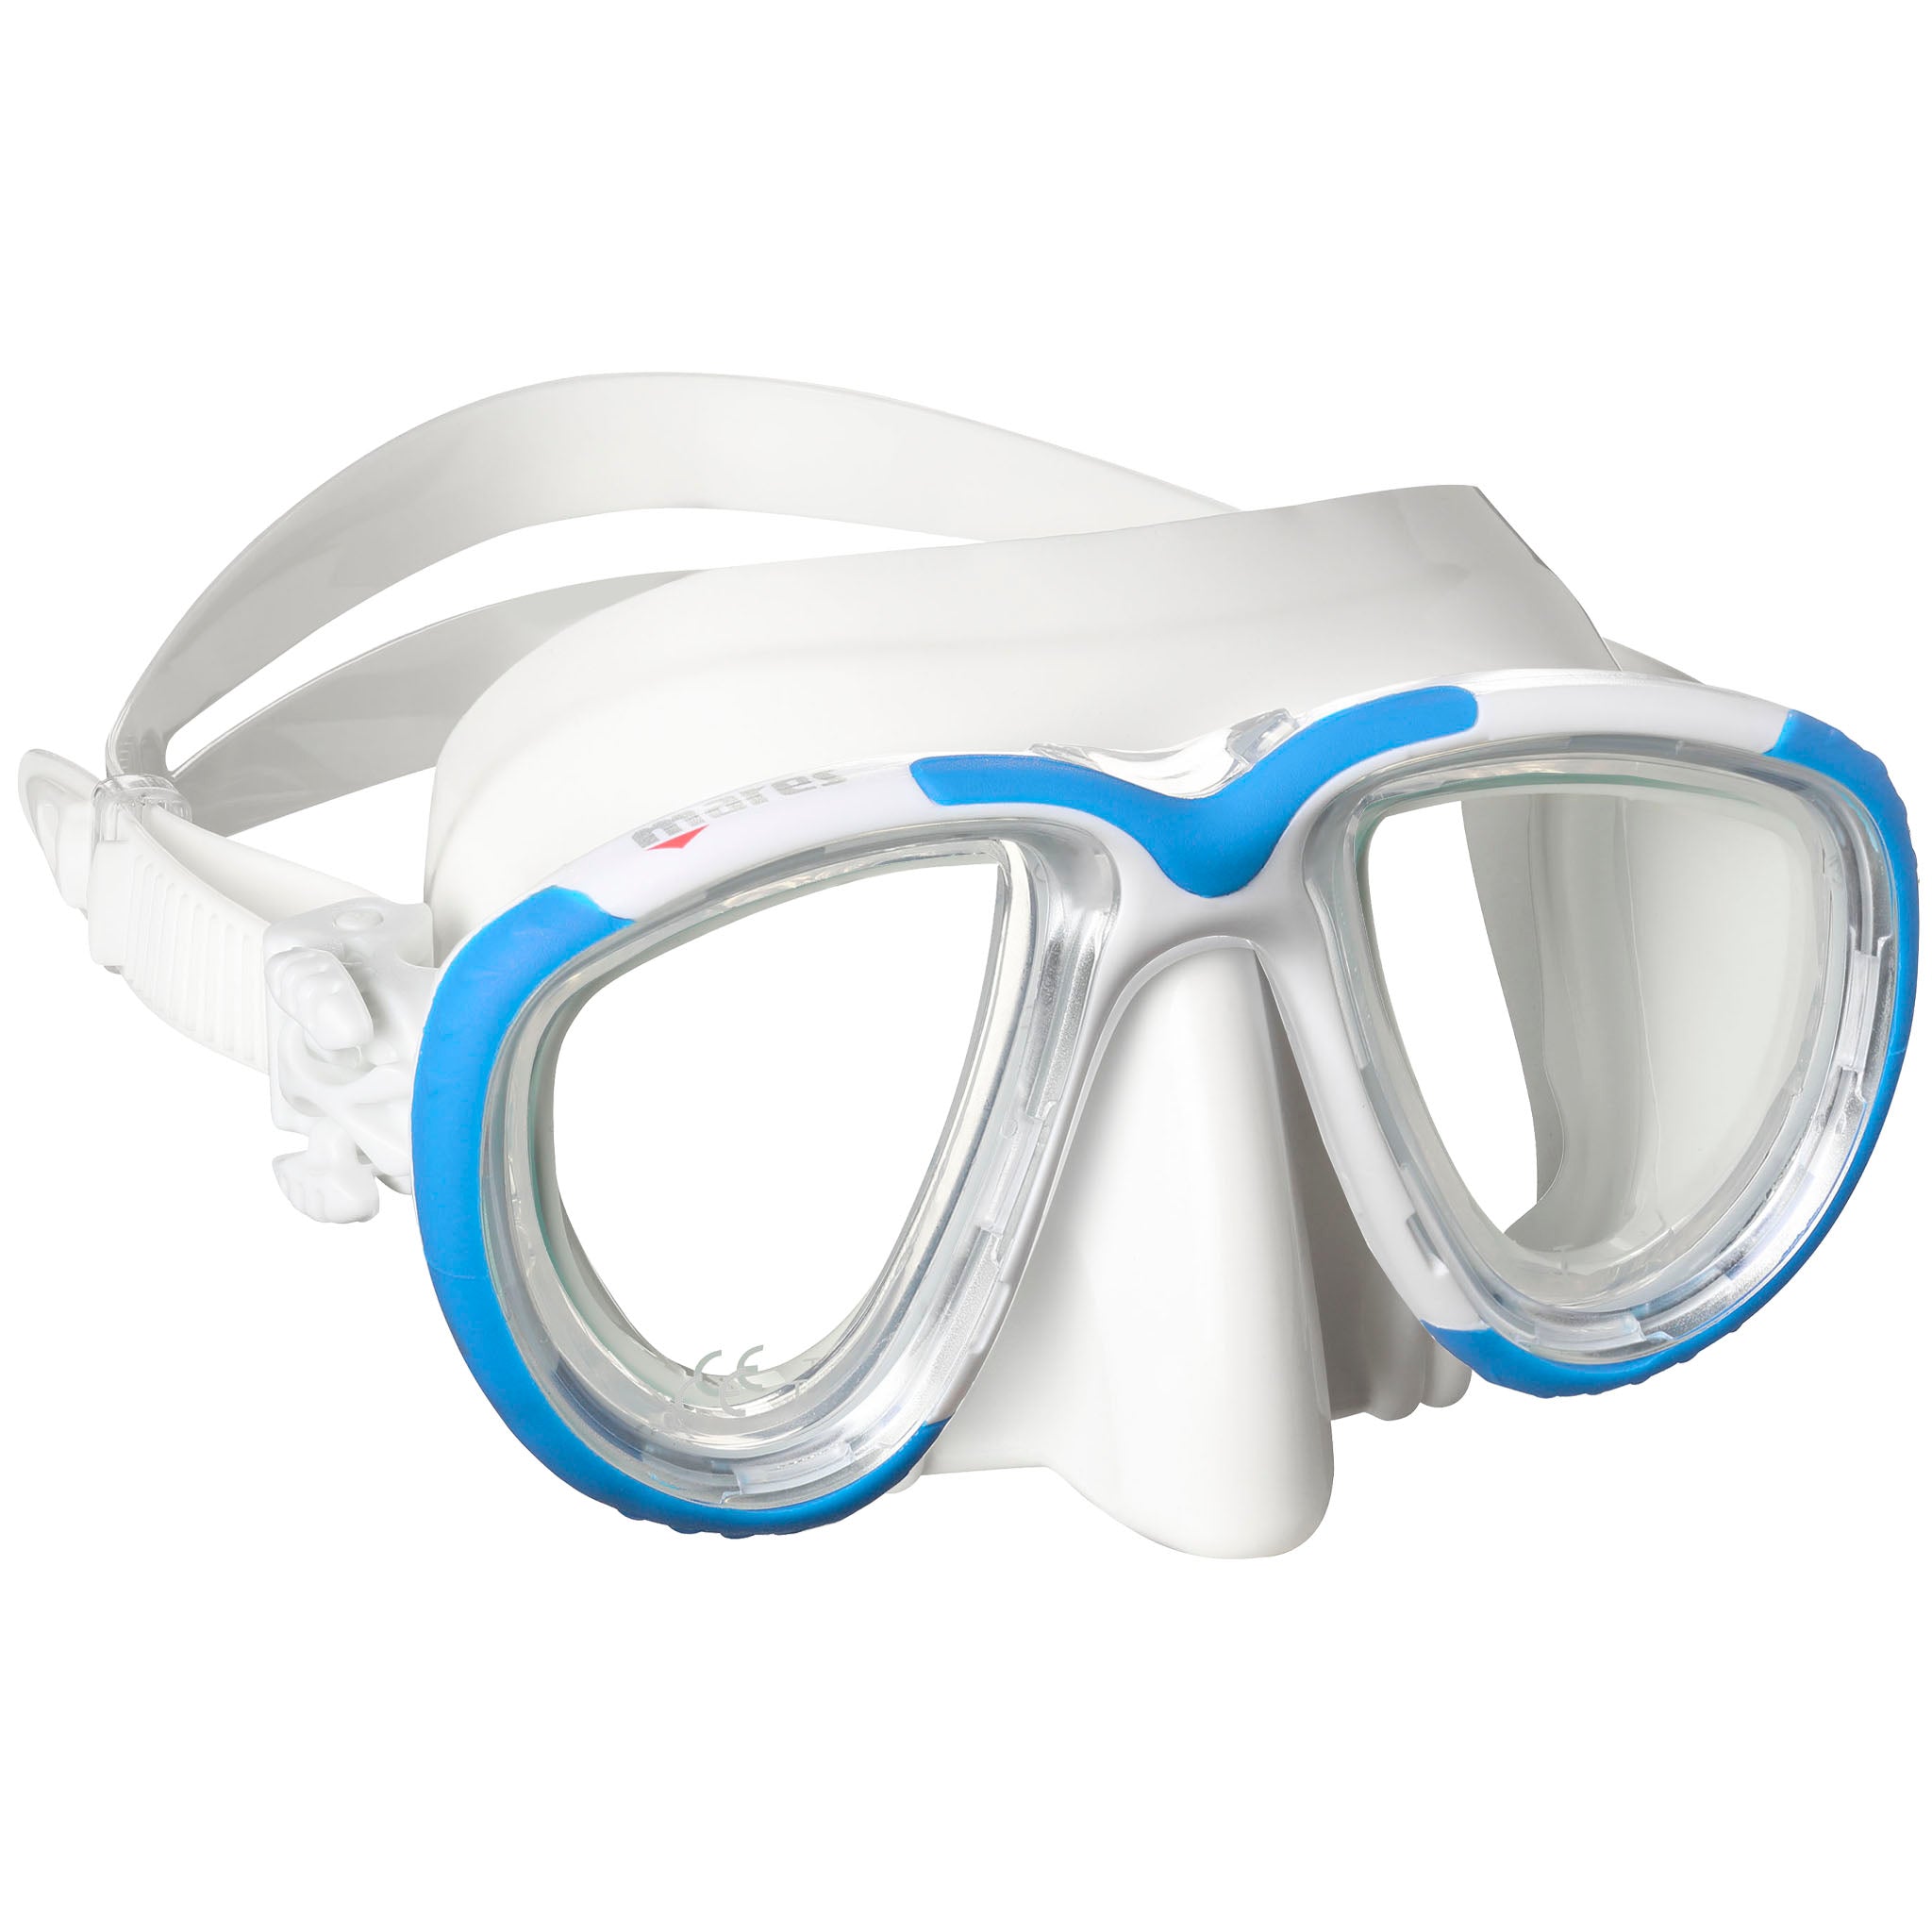 Mares Tana Diving, Snorkelling and Freediving Mask - White Blue White